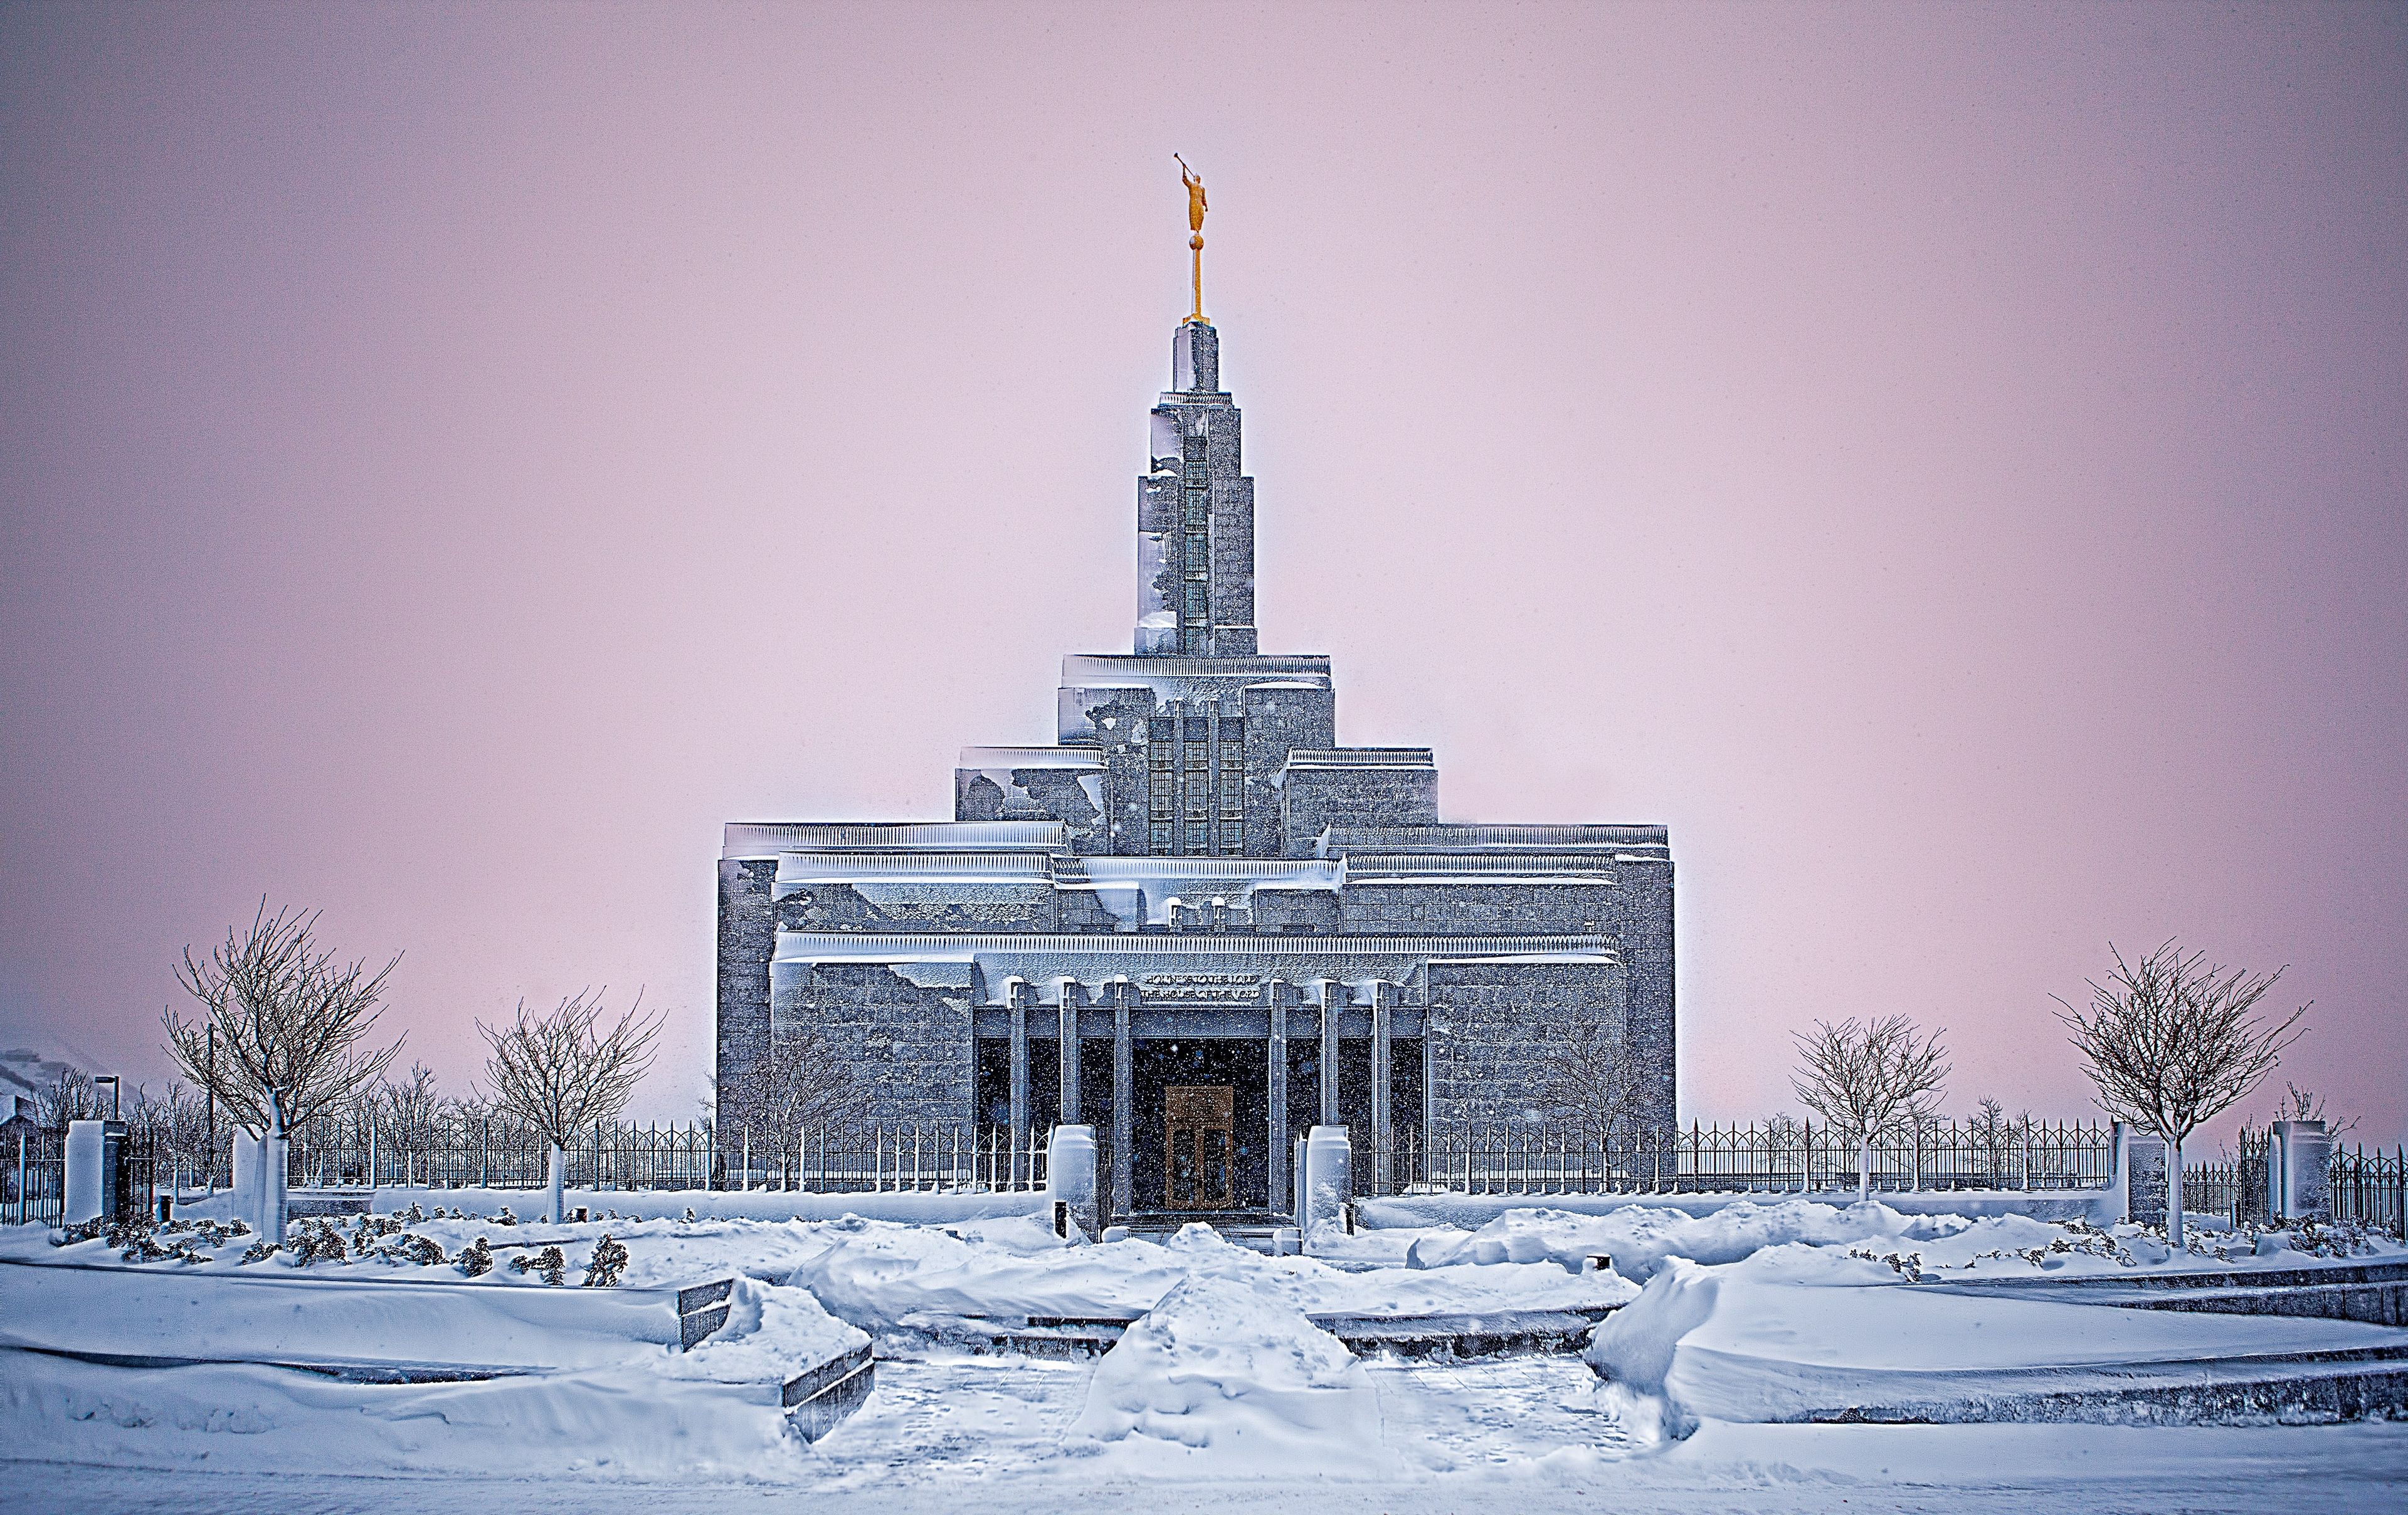 A view of the front of the Draper Utah Temple in the winter.